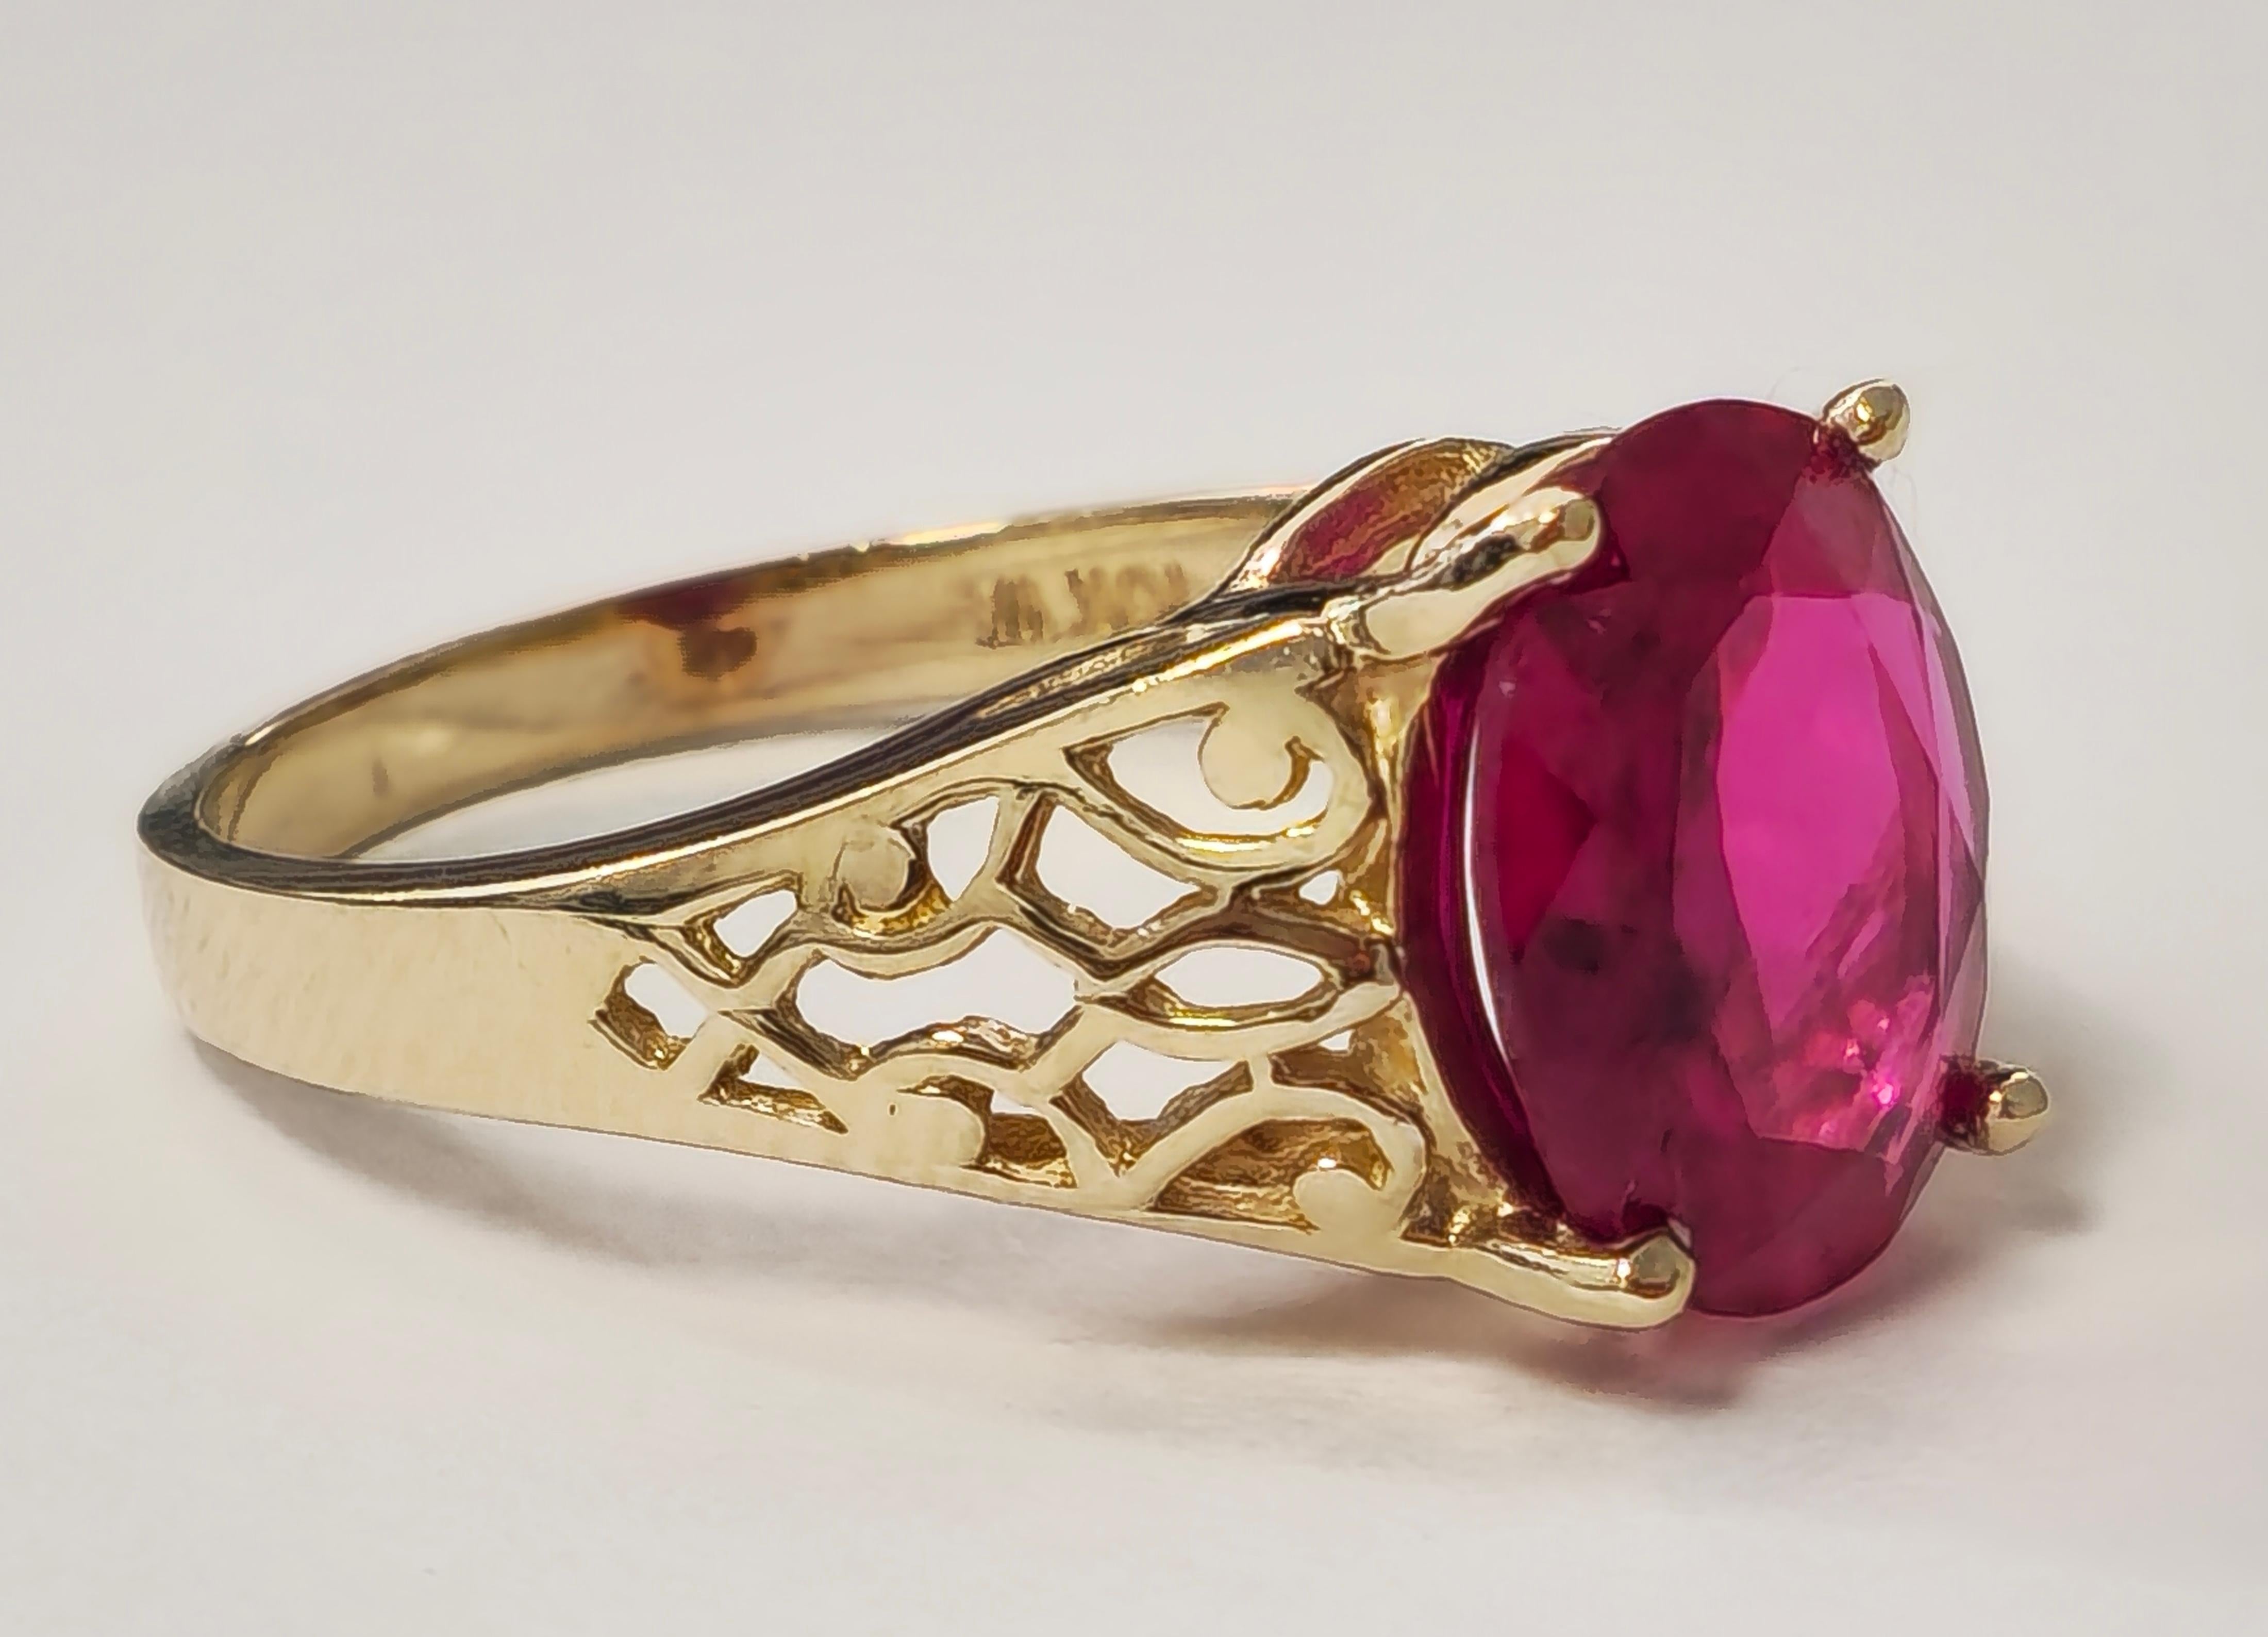 Taille ovale The Collective Vintage AAA Ruby Ring in Yellow Gold (Bague de collection en or jaune avec rubis AAA)  en vente